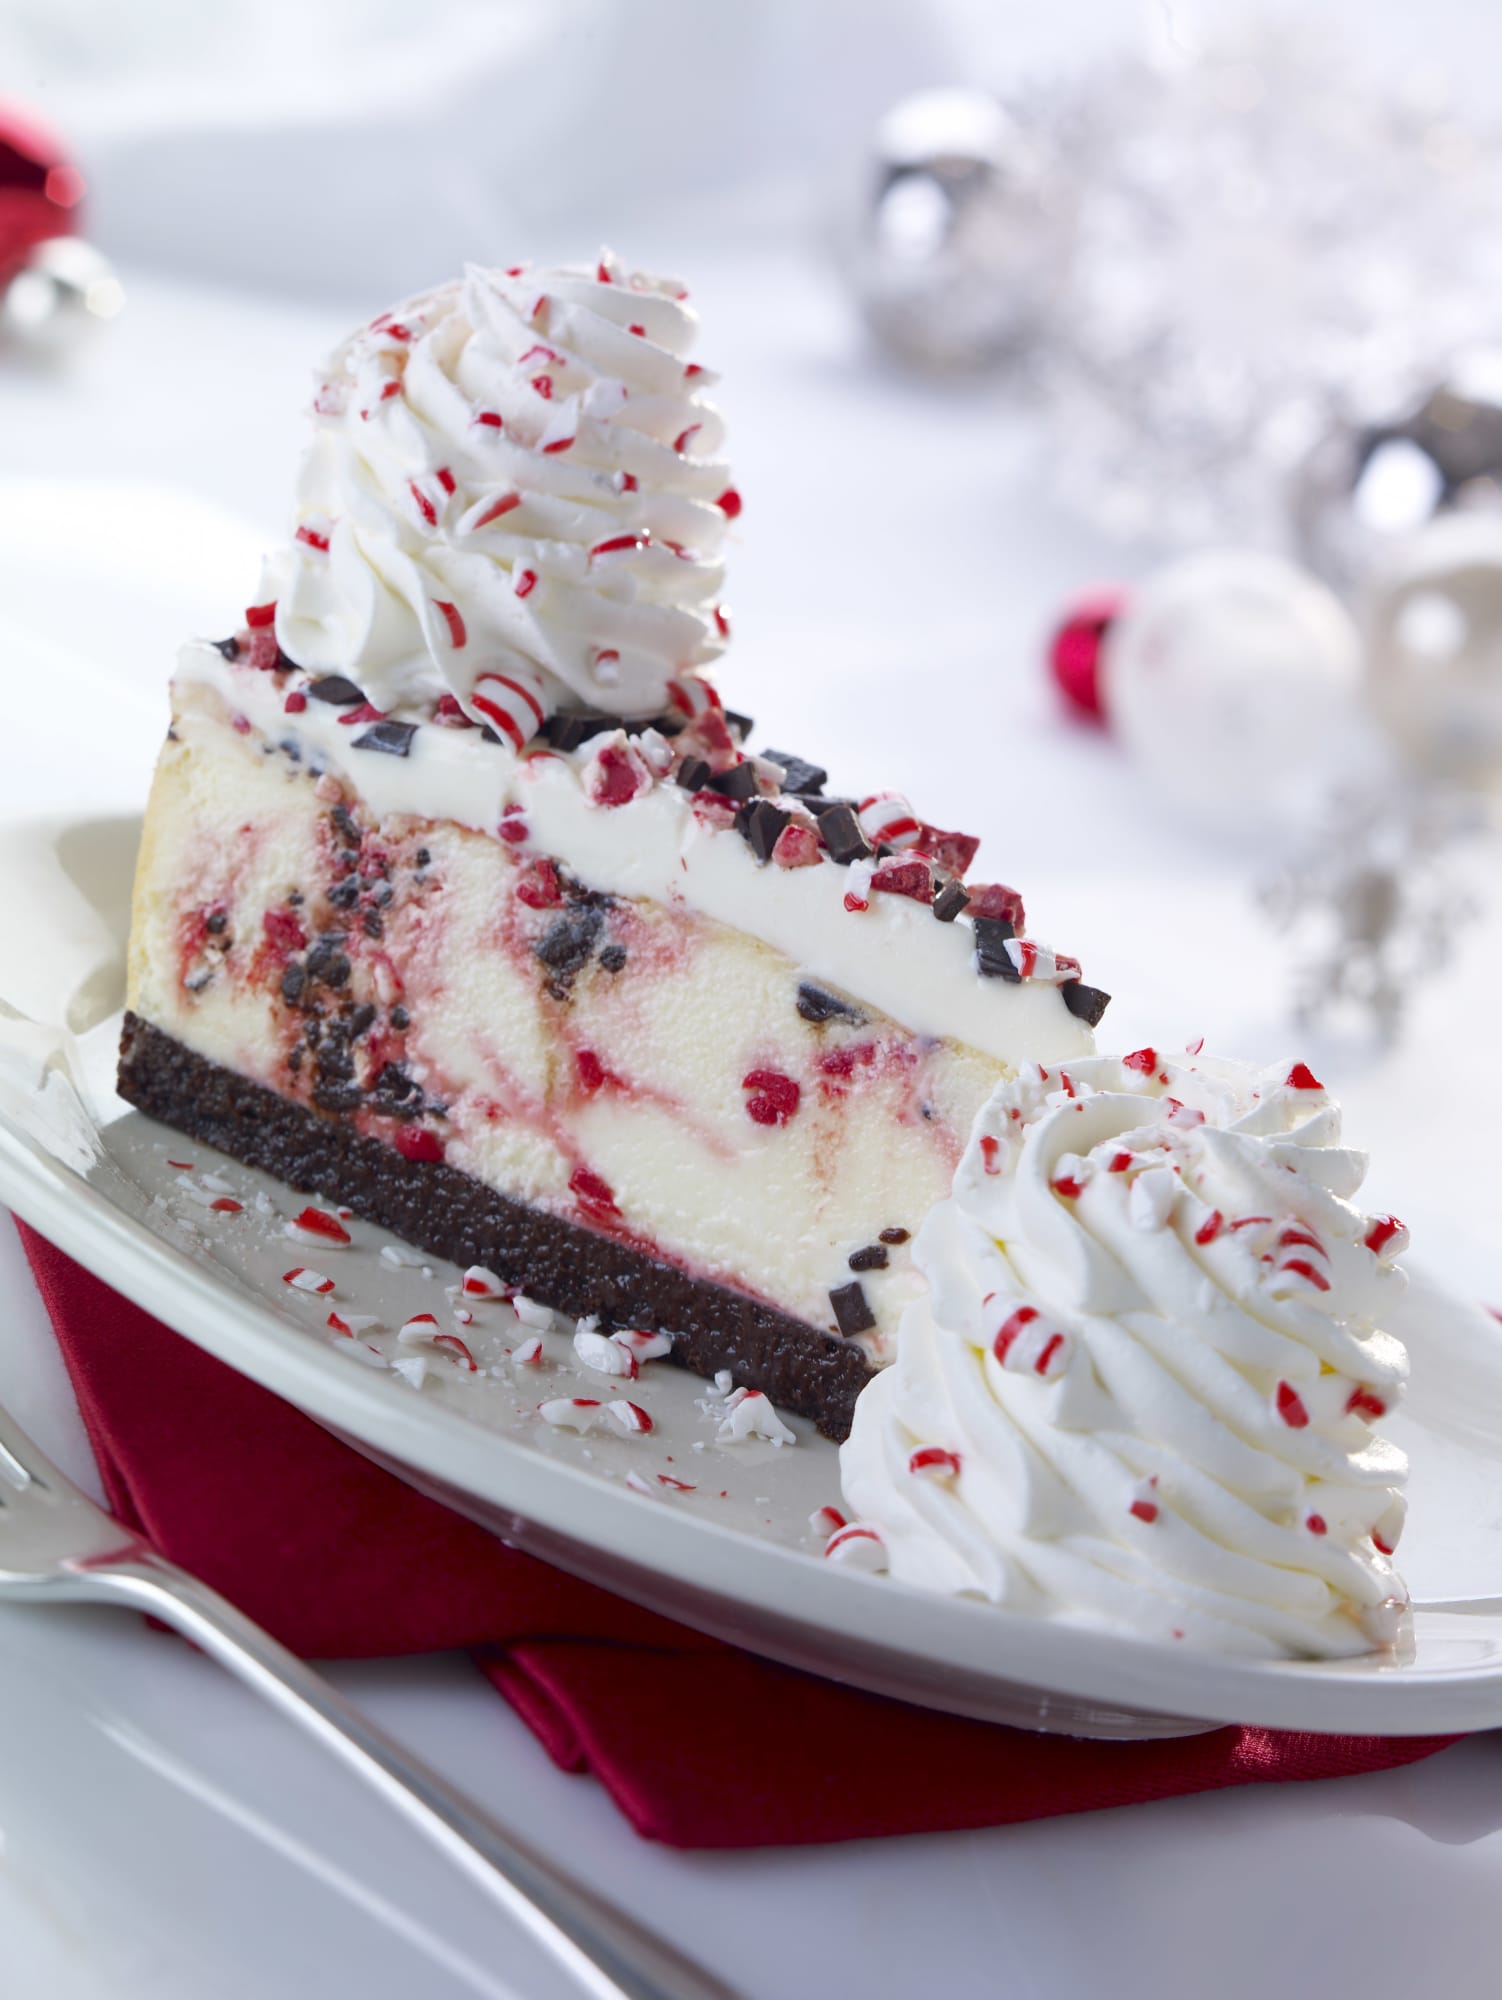 The Cheesecake Factory has brought back Peppermint Bark Cheesecake